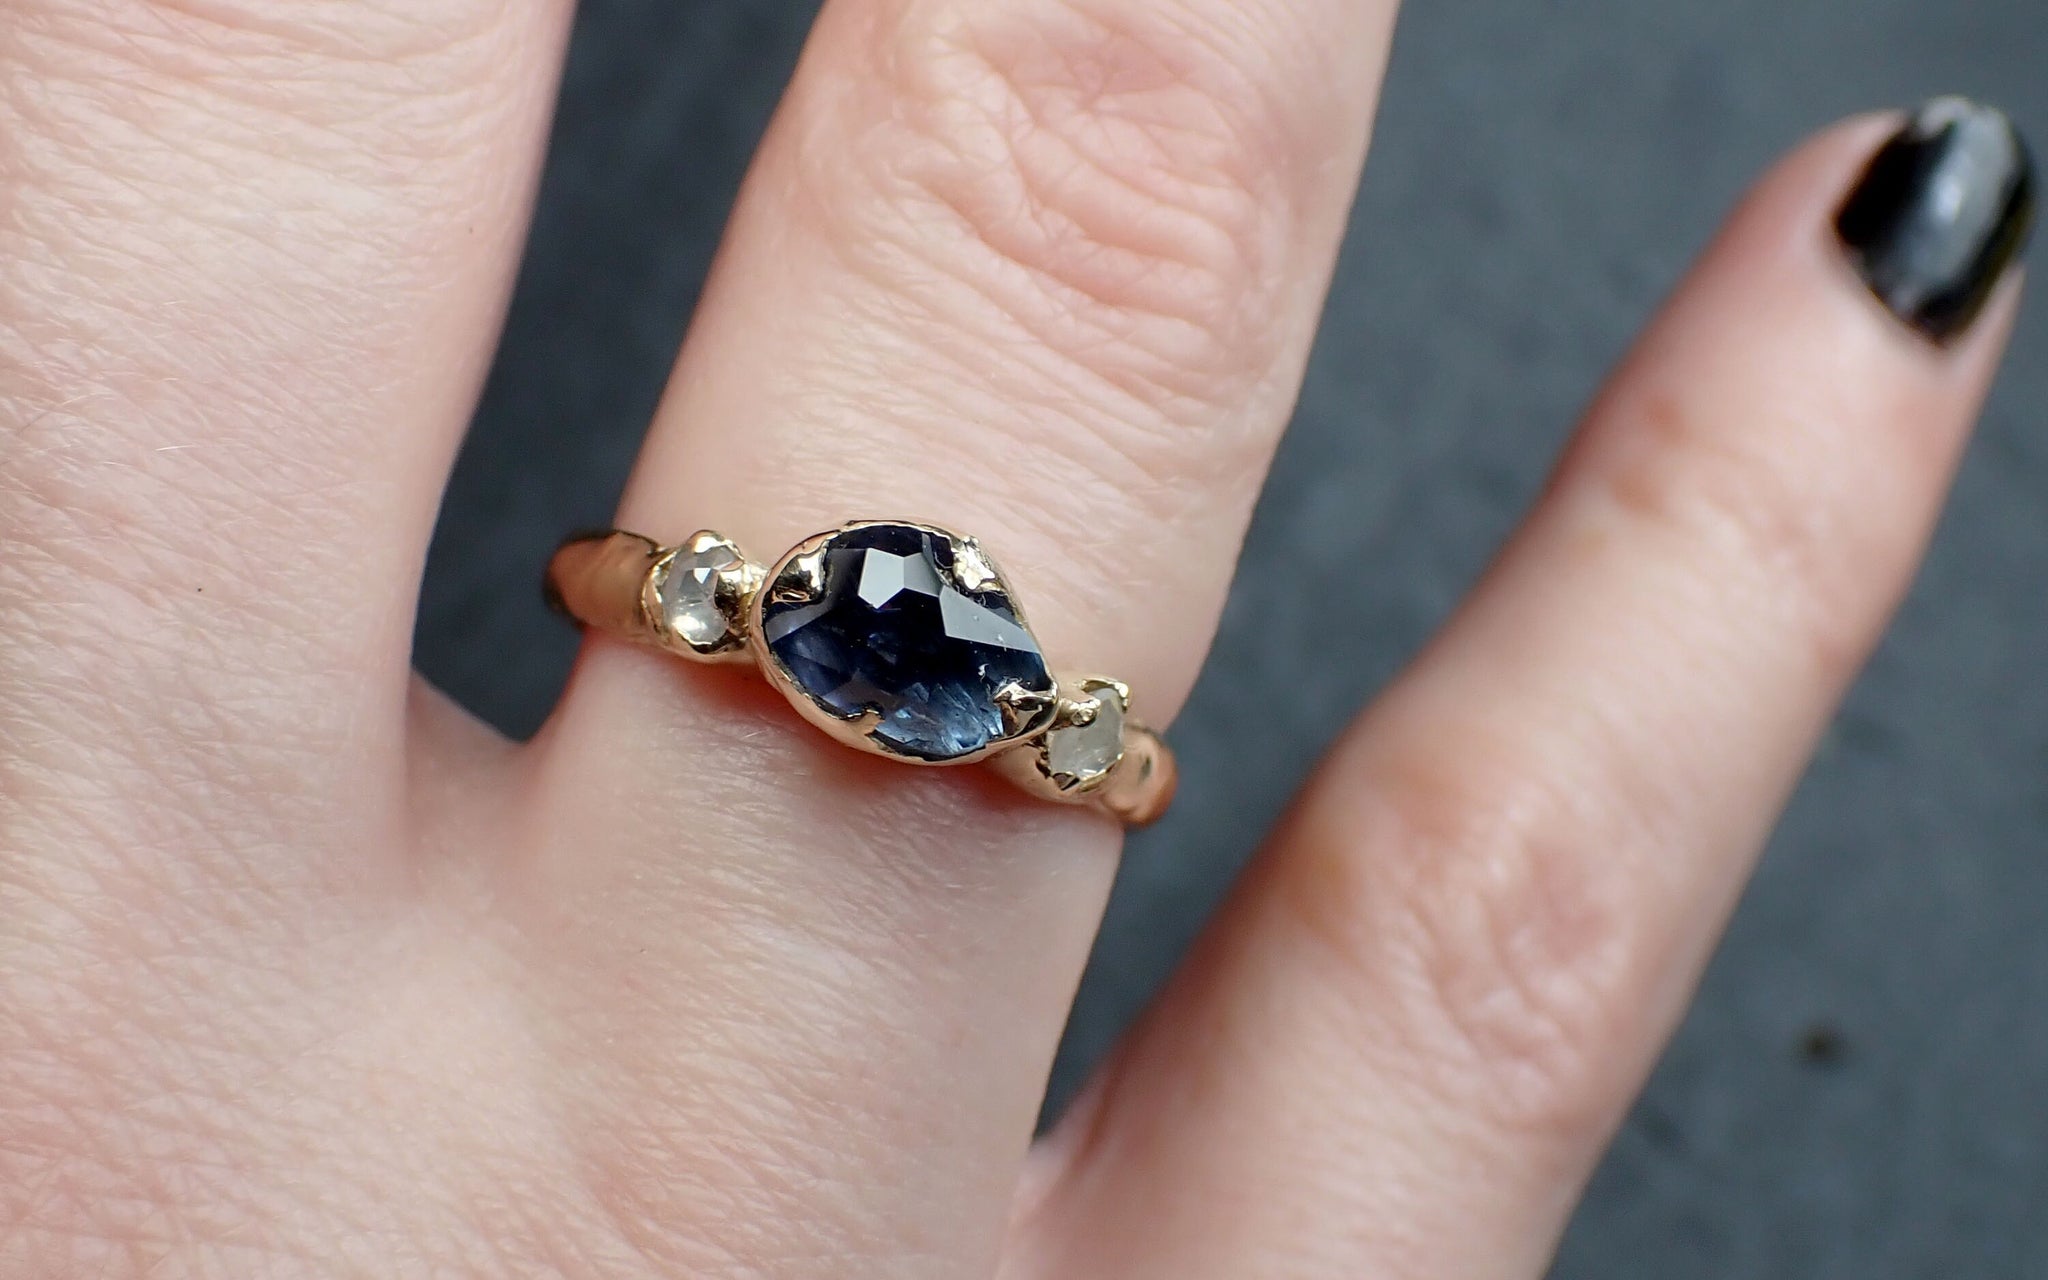 Partially faceted blue Sapphire and fancy Diamonds 14k Yellow Gold Engagement Wedding Ring Gemstone Ring Multi stone Ring 3252